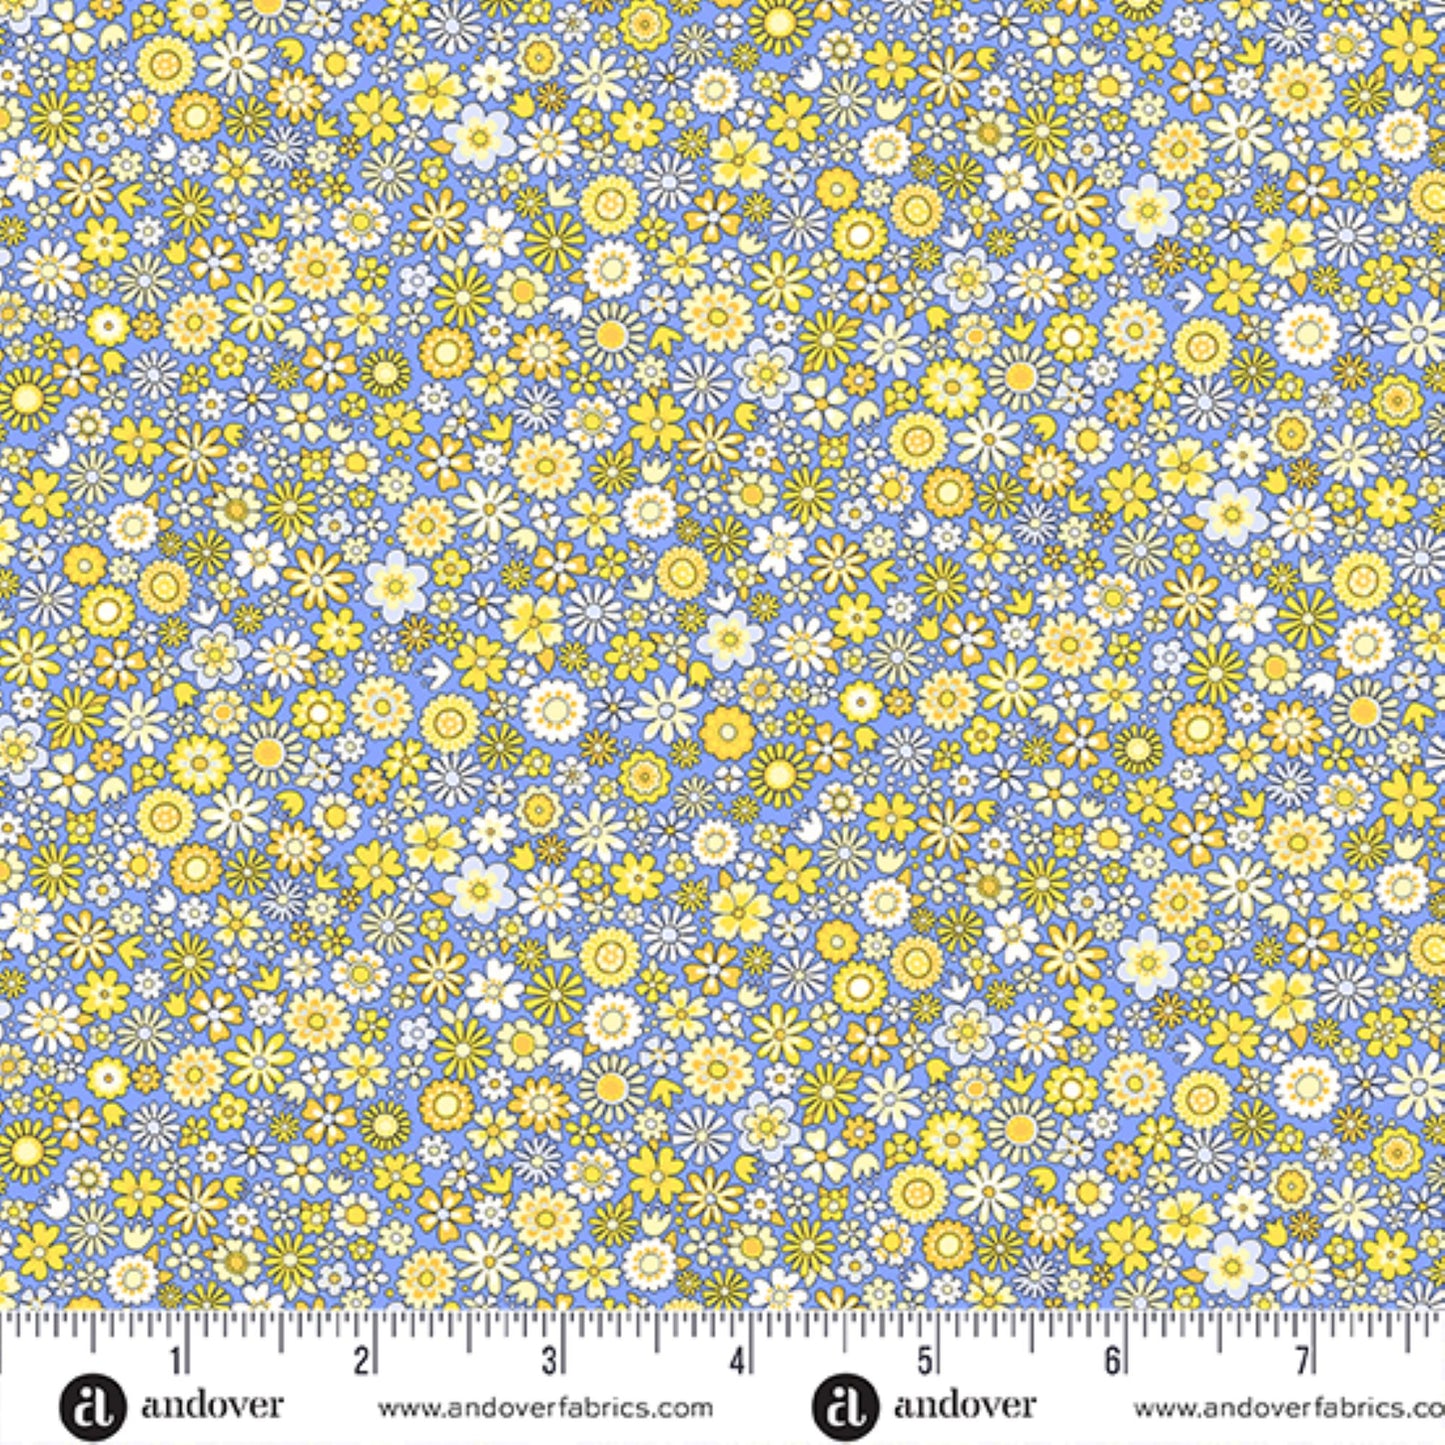 Country Cuttings florals yellow blue bundle - 6 Fat Quarters cotton quilt fabric by Makower UK